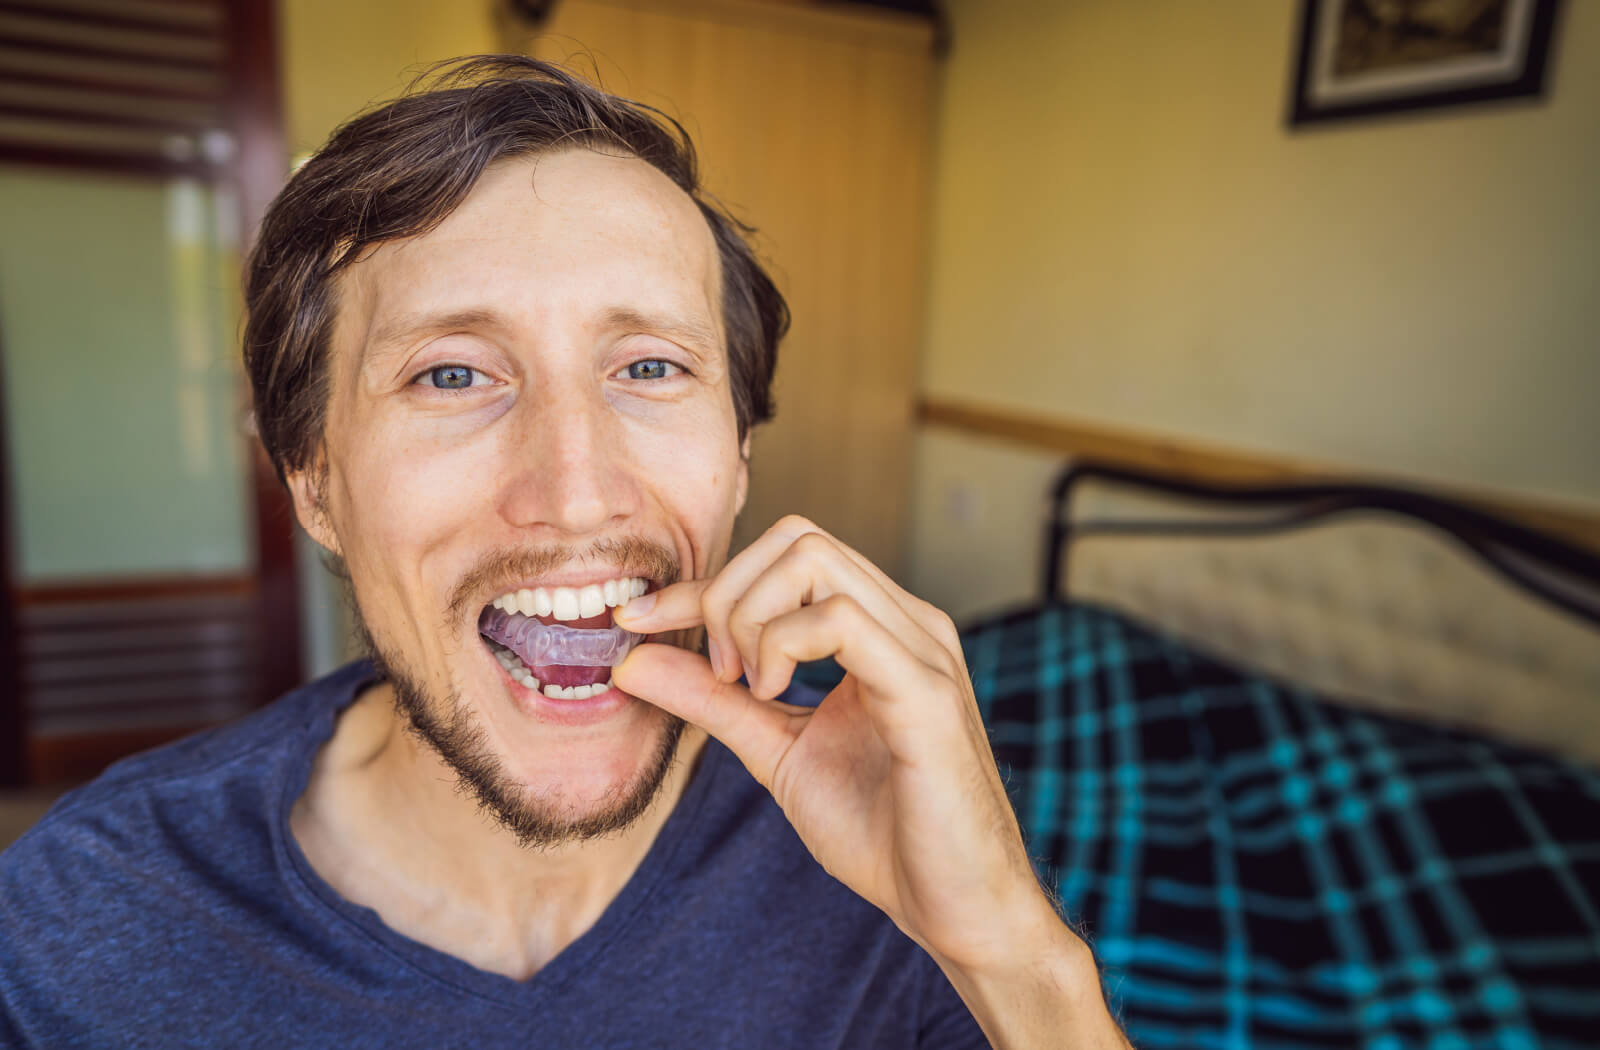 A man putting on a mouthguard to protect his teeth from grinding.